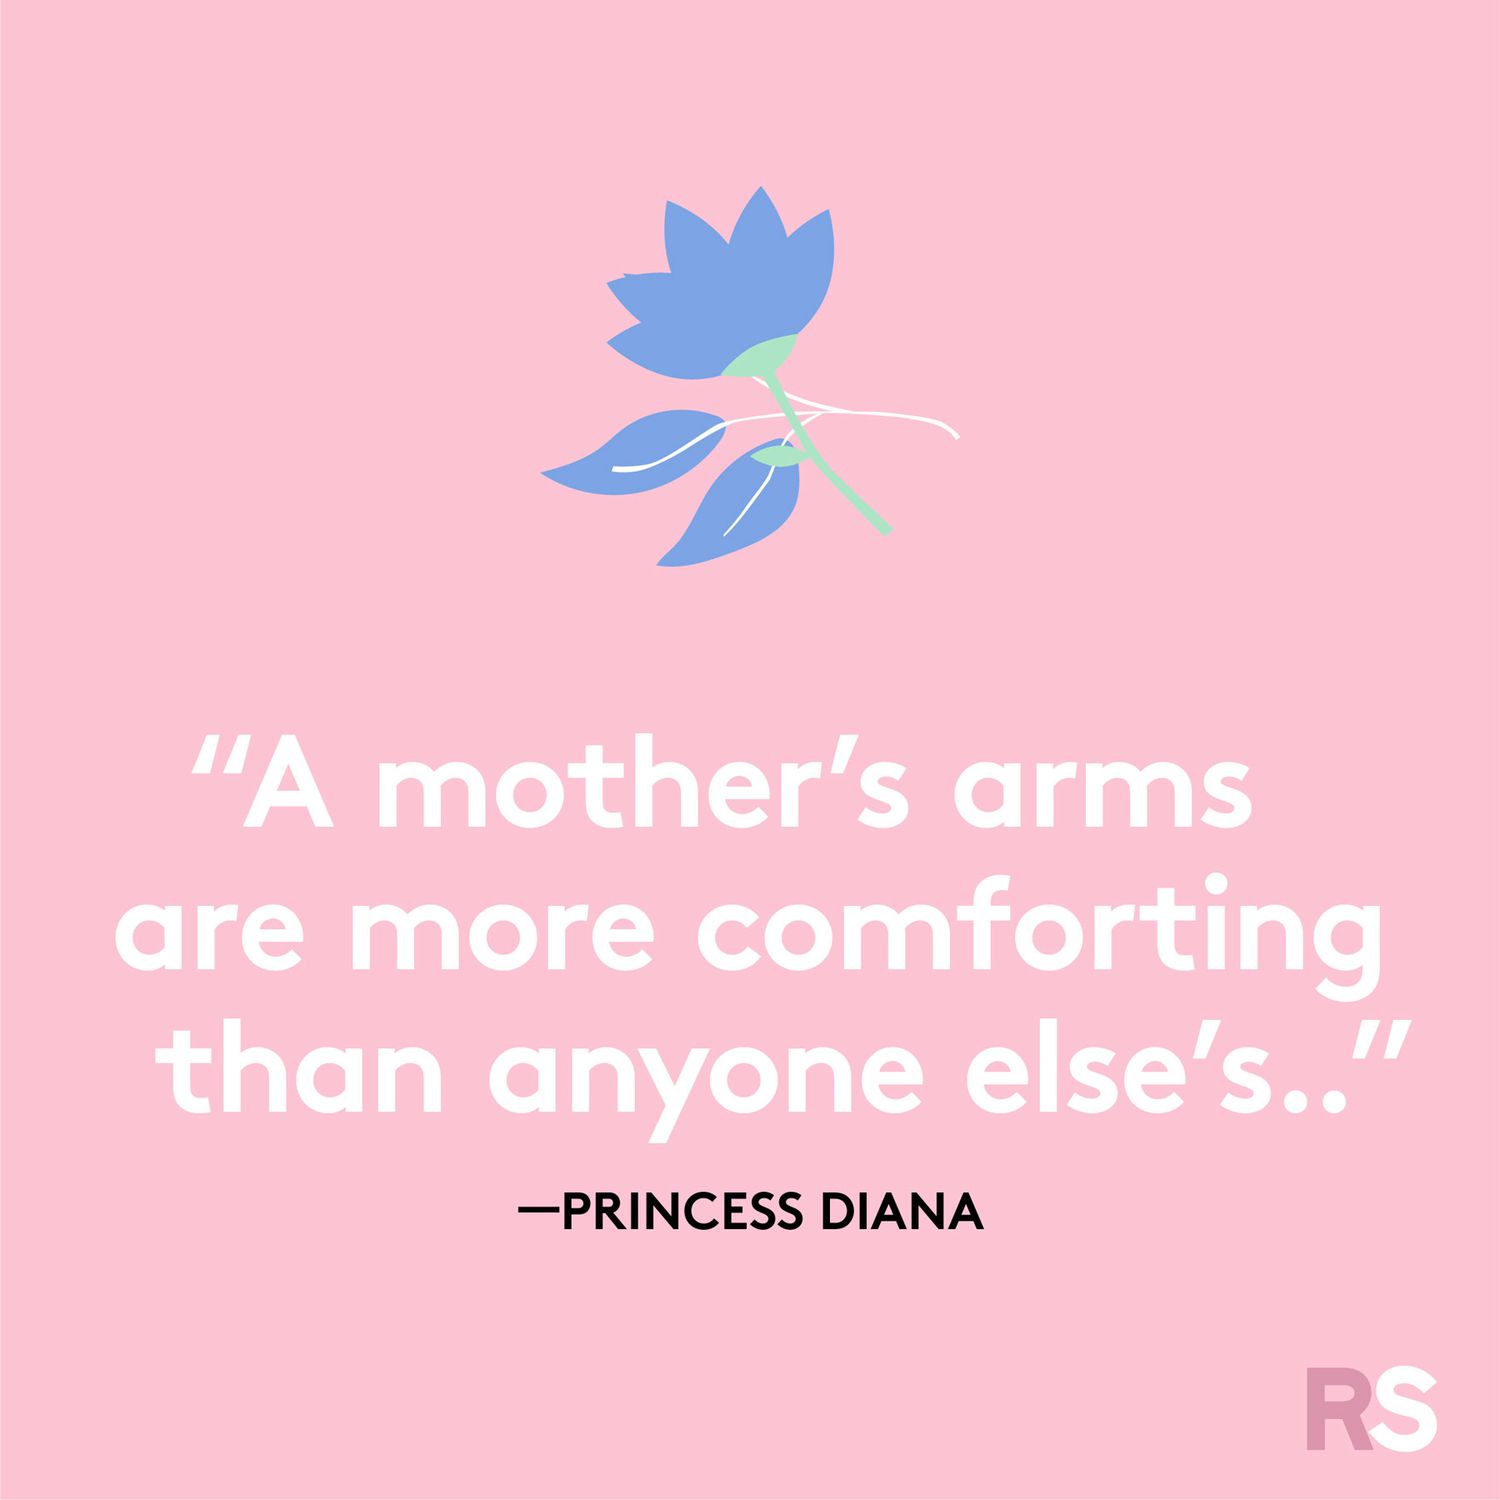 A mother's arms are more comforting than anyone else's.